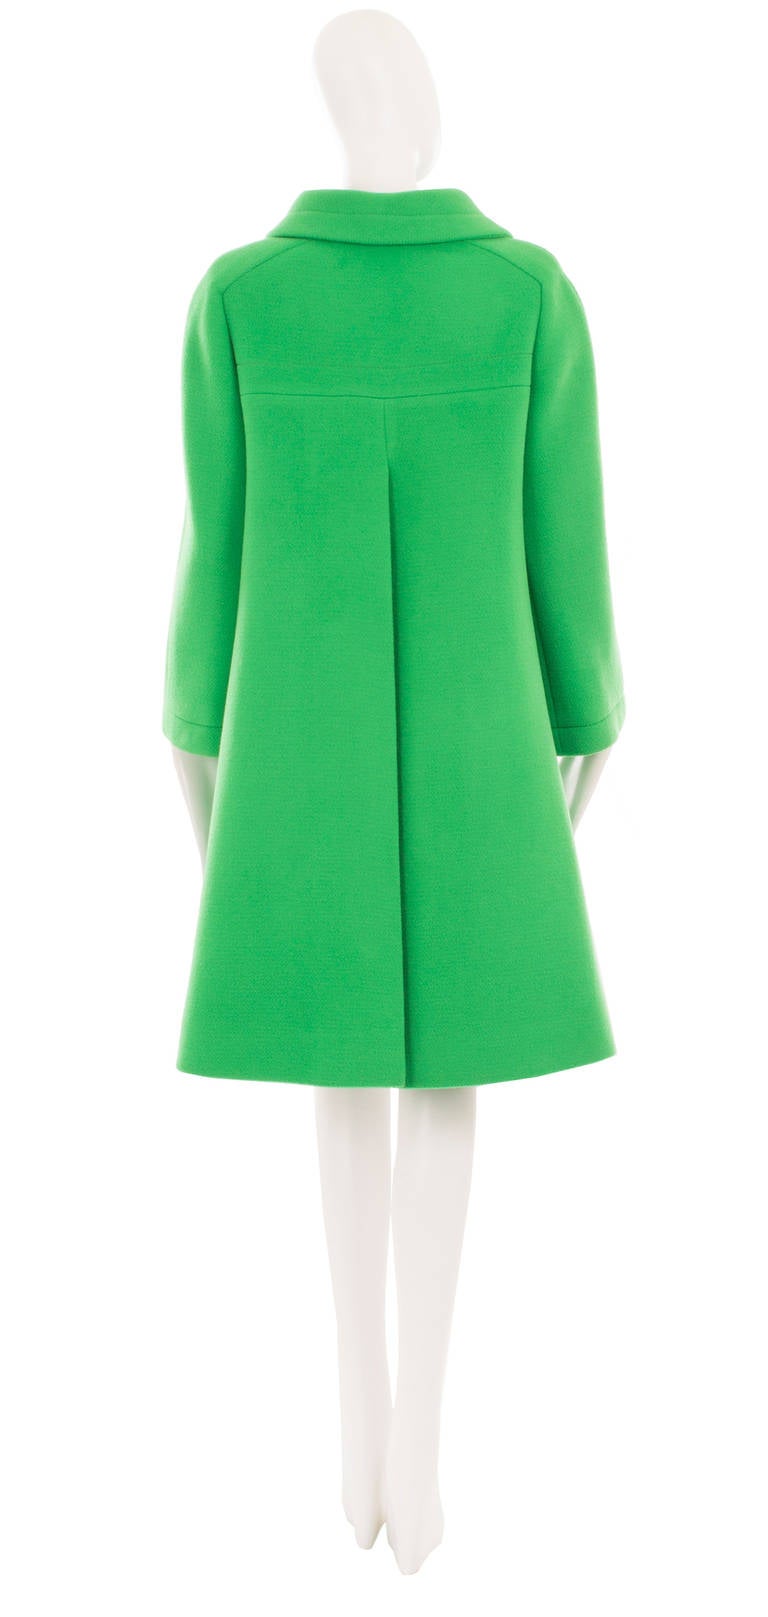 A Guy Laroche couture coat, circa 1965 In Excellent Condition For Sale In London, GB